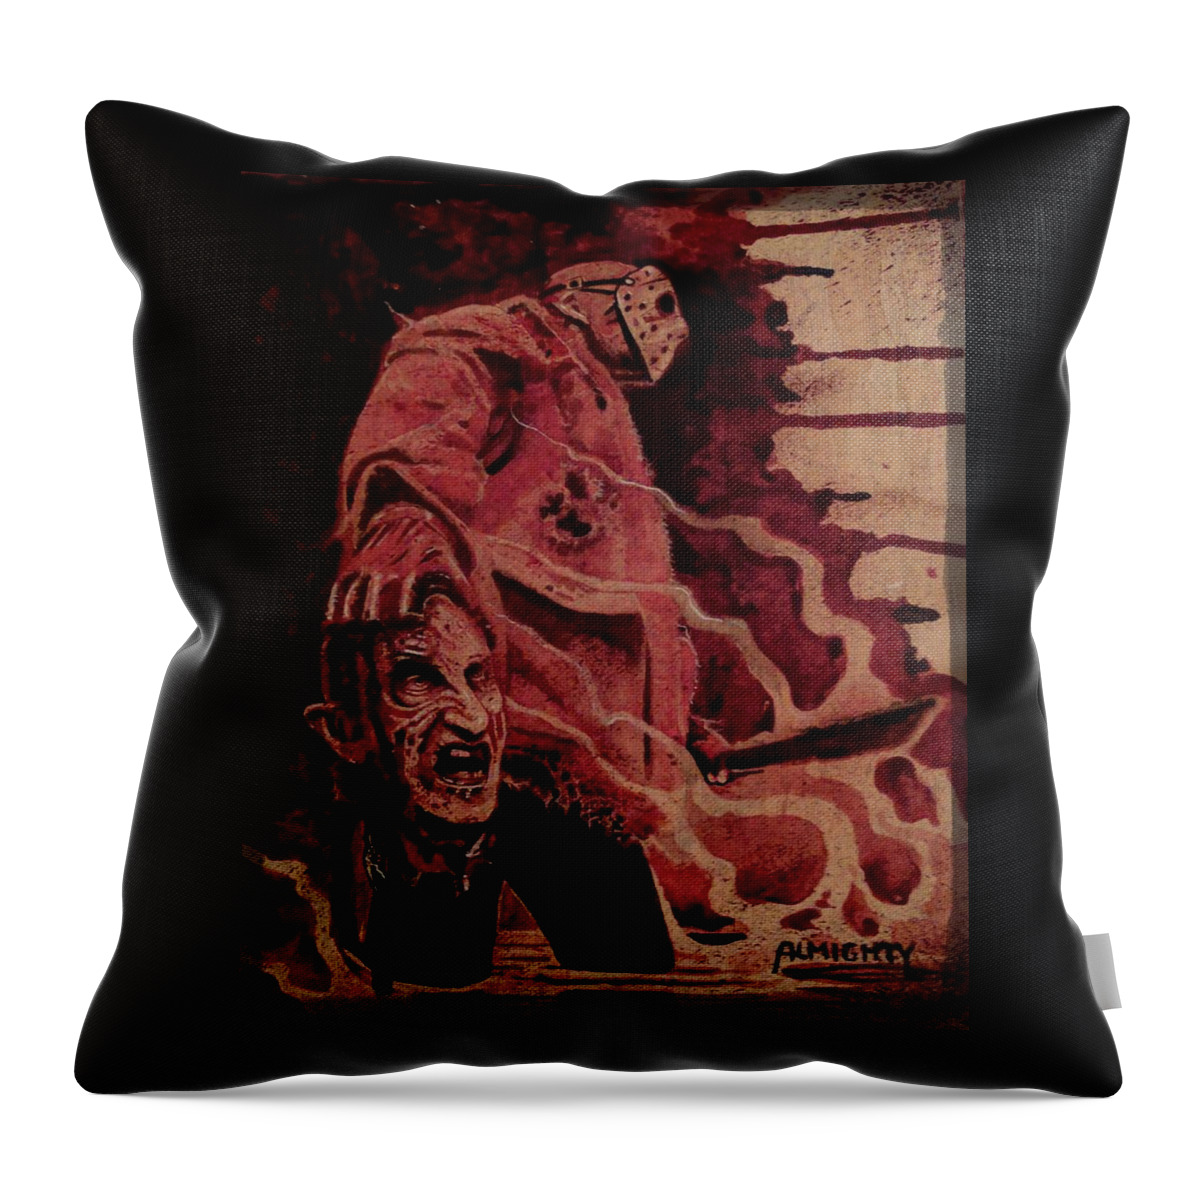 Ryanalmighty Throw Pillow featuring the painting FREDDY vs JASON by Ryan Almighty